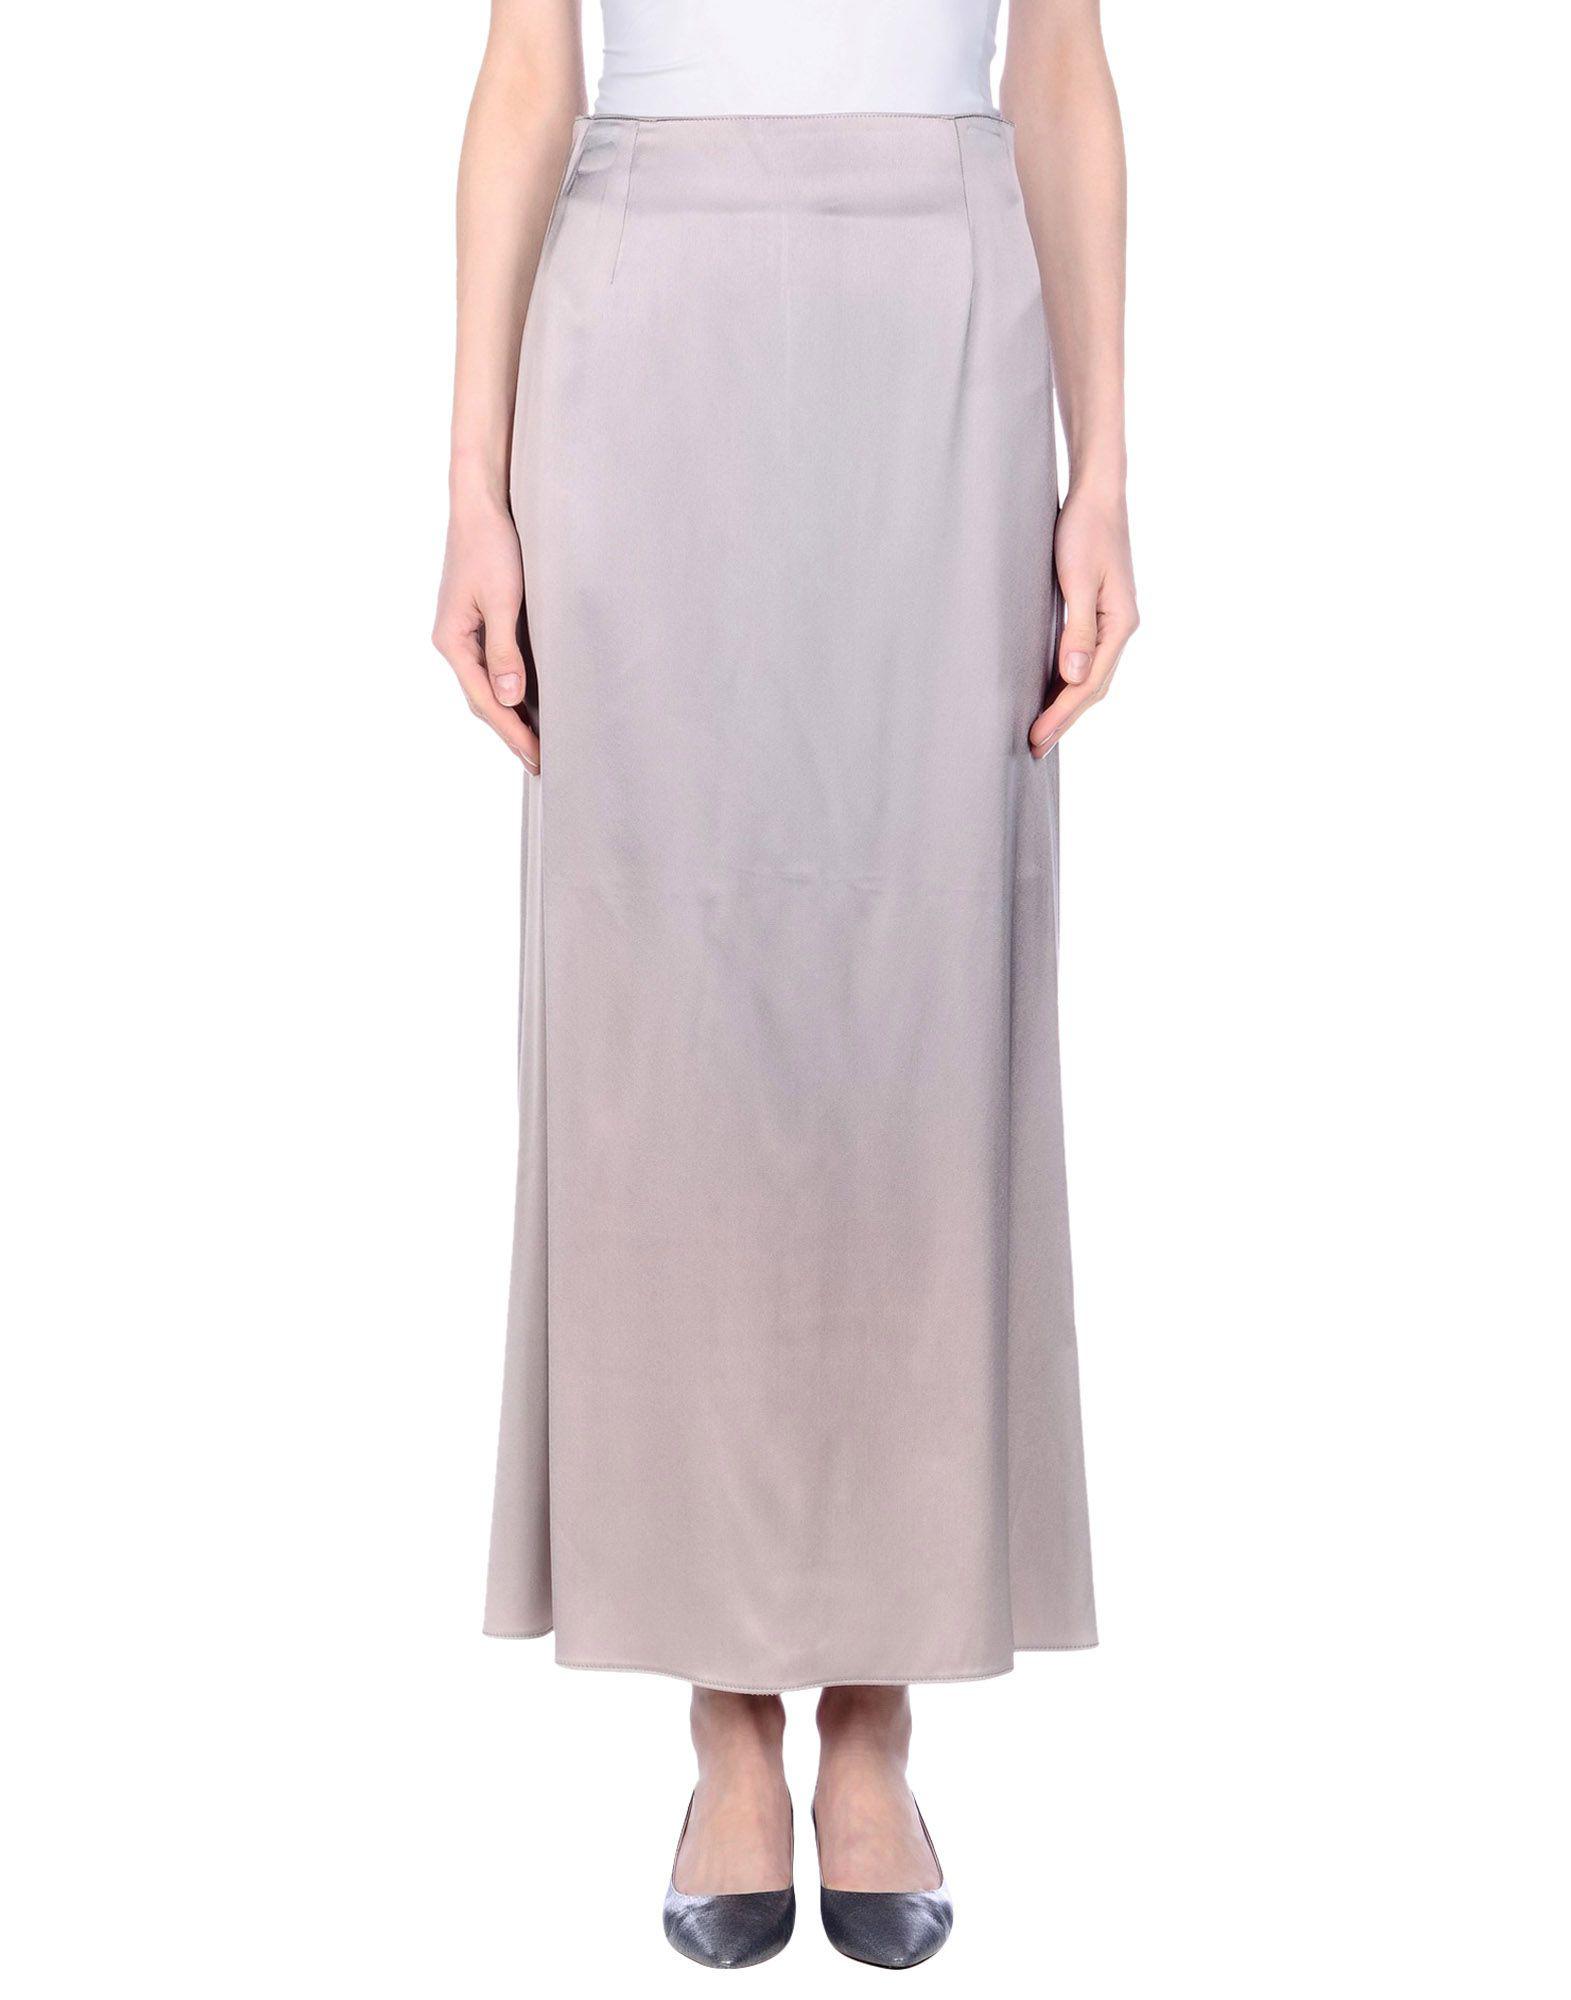 Lyst - Caractere Long Skirt in Gray